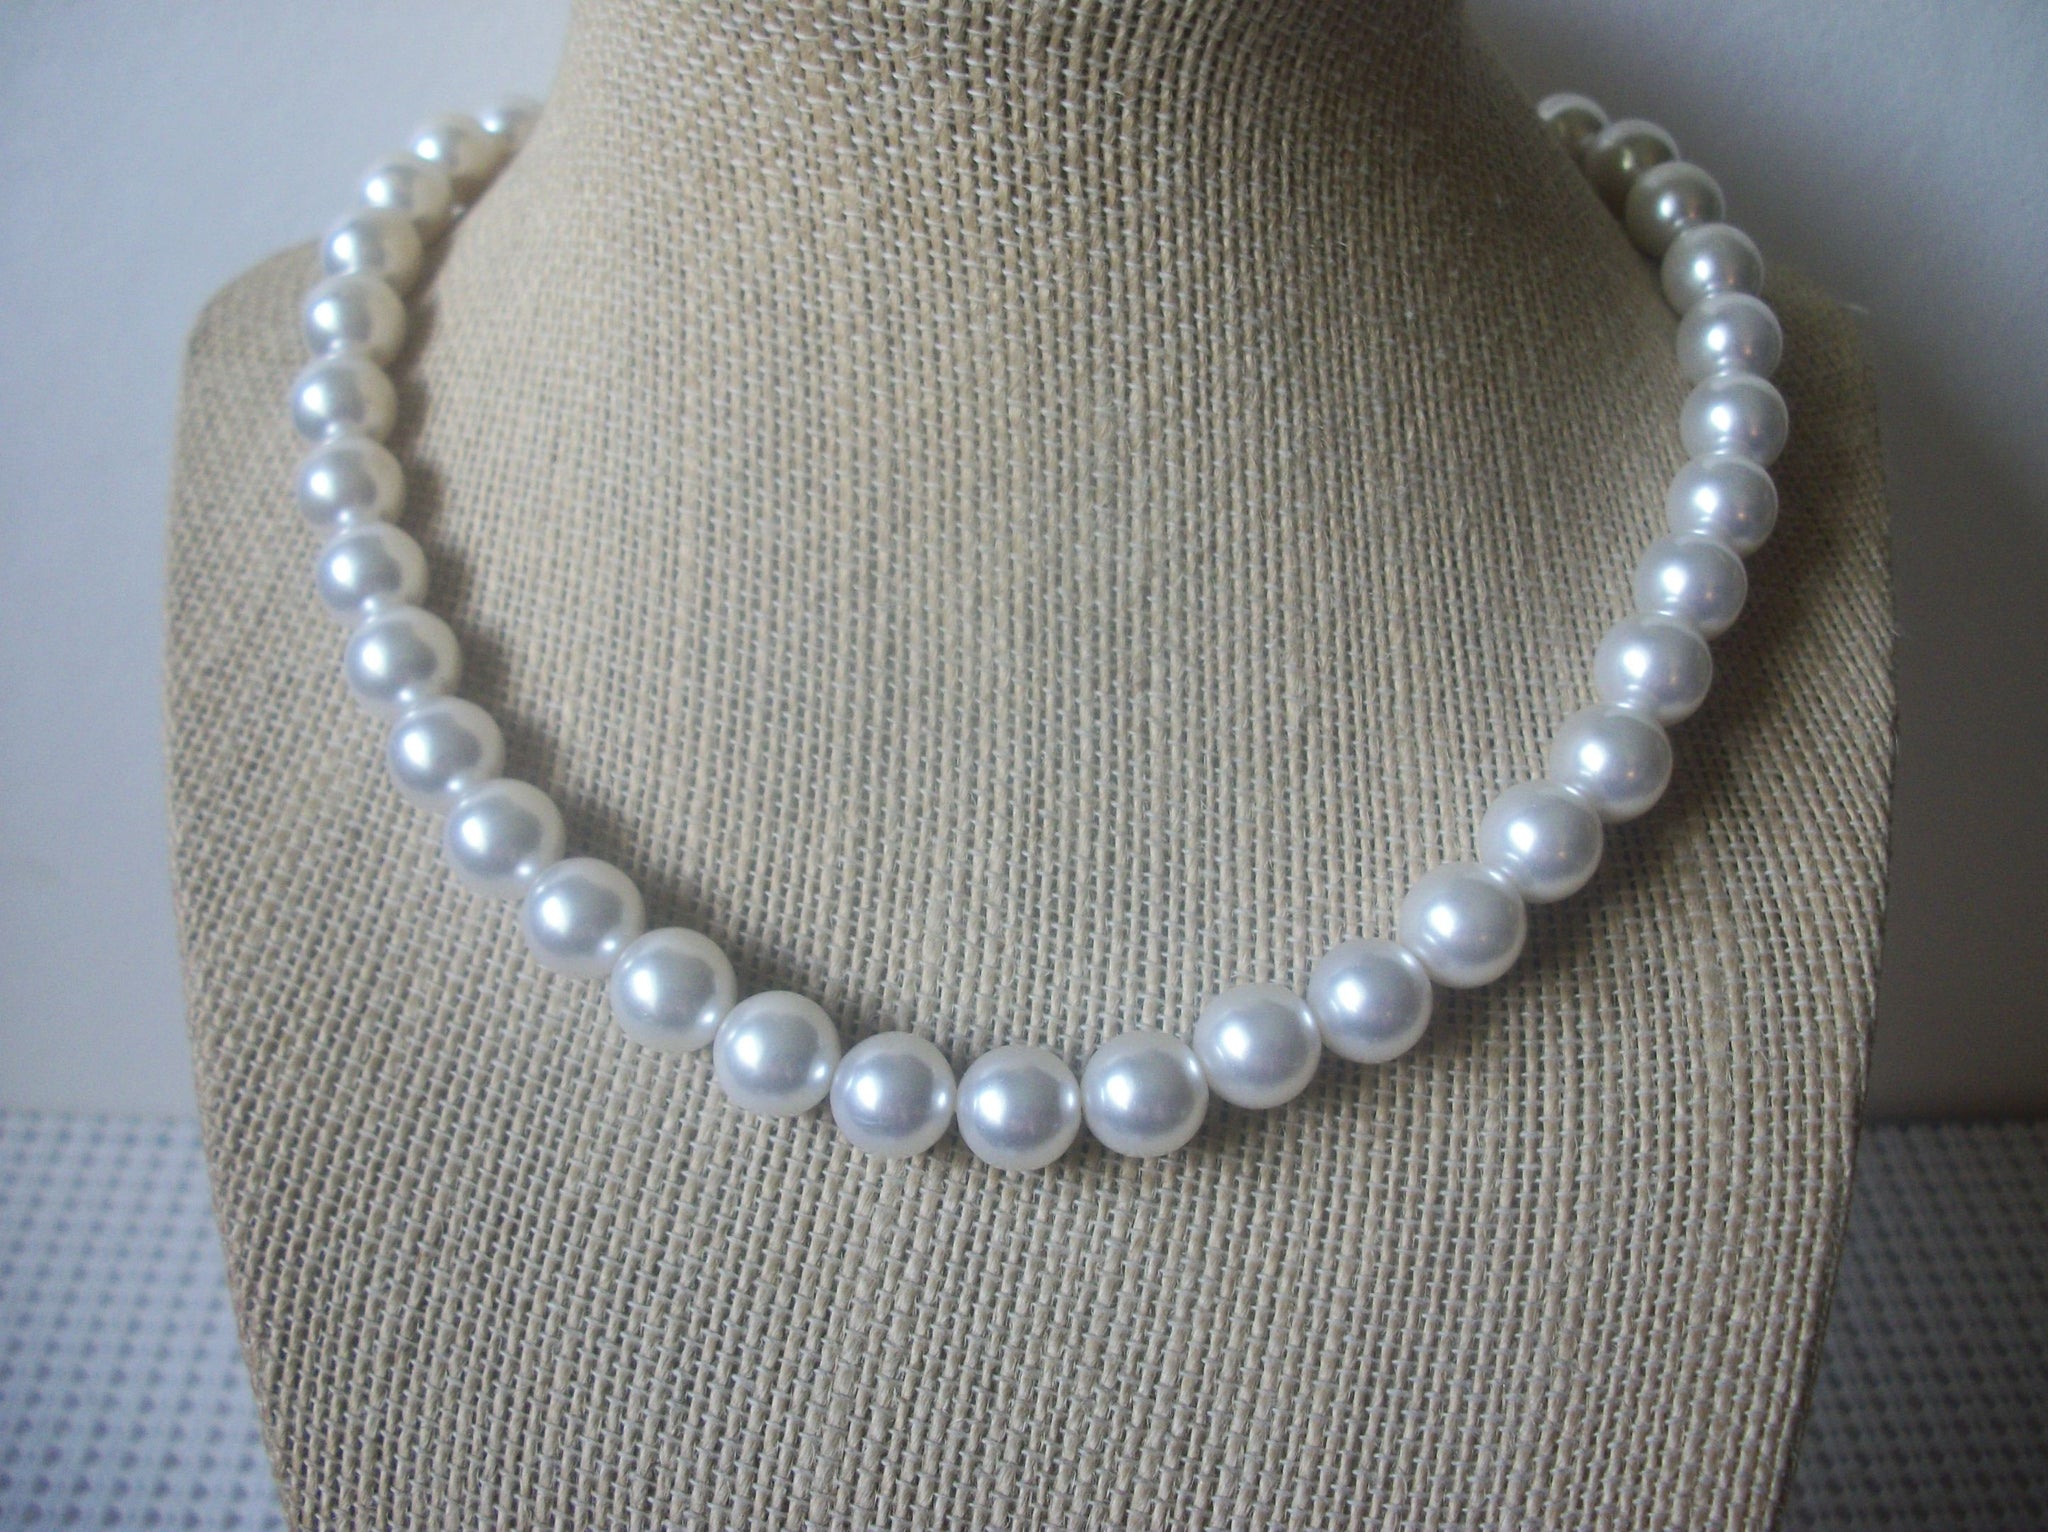 Vintage Jewelry, Signed JAPAN, White Faux Pearls, 15" - 18" Necklace 121416